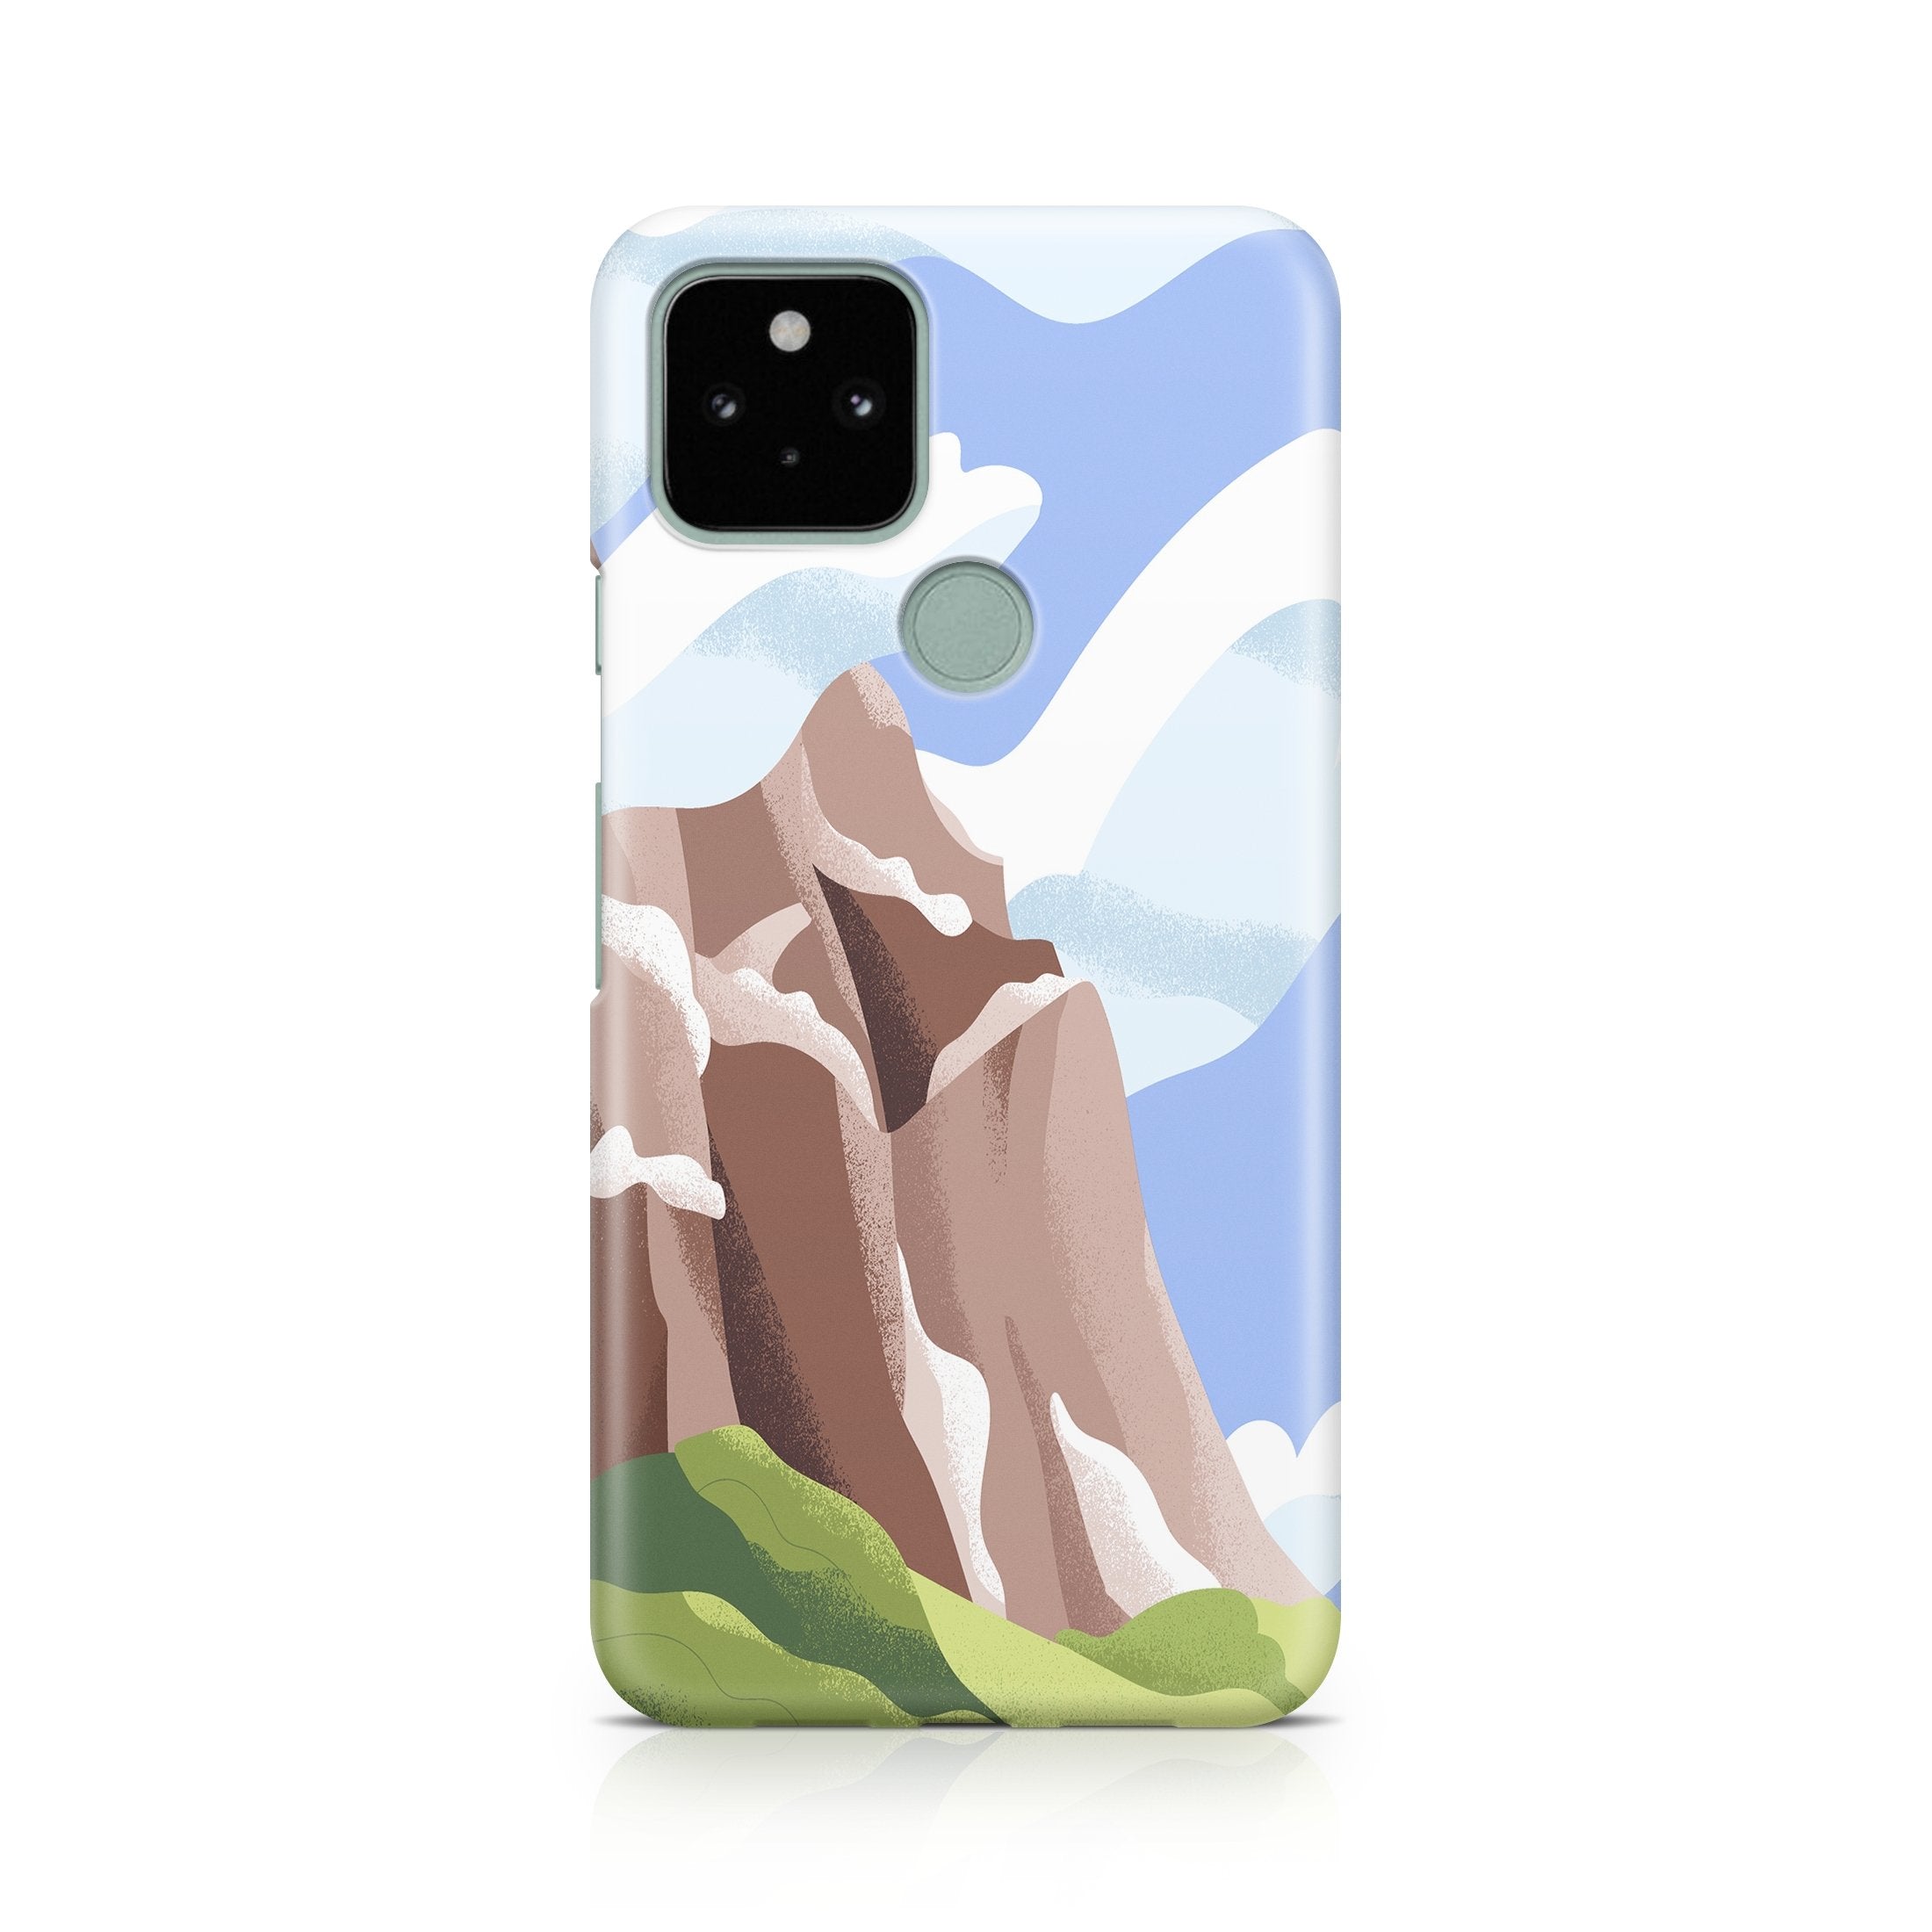 Watercolor Mountain - Google phone case designs by CaseSwagger